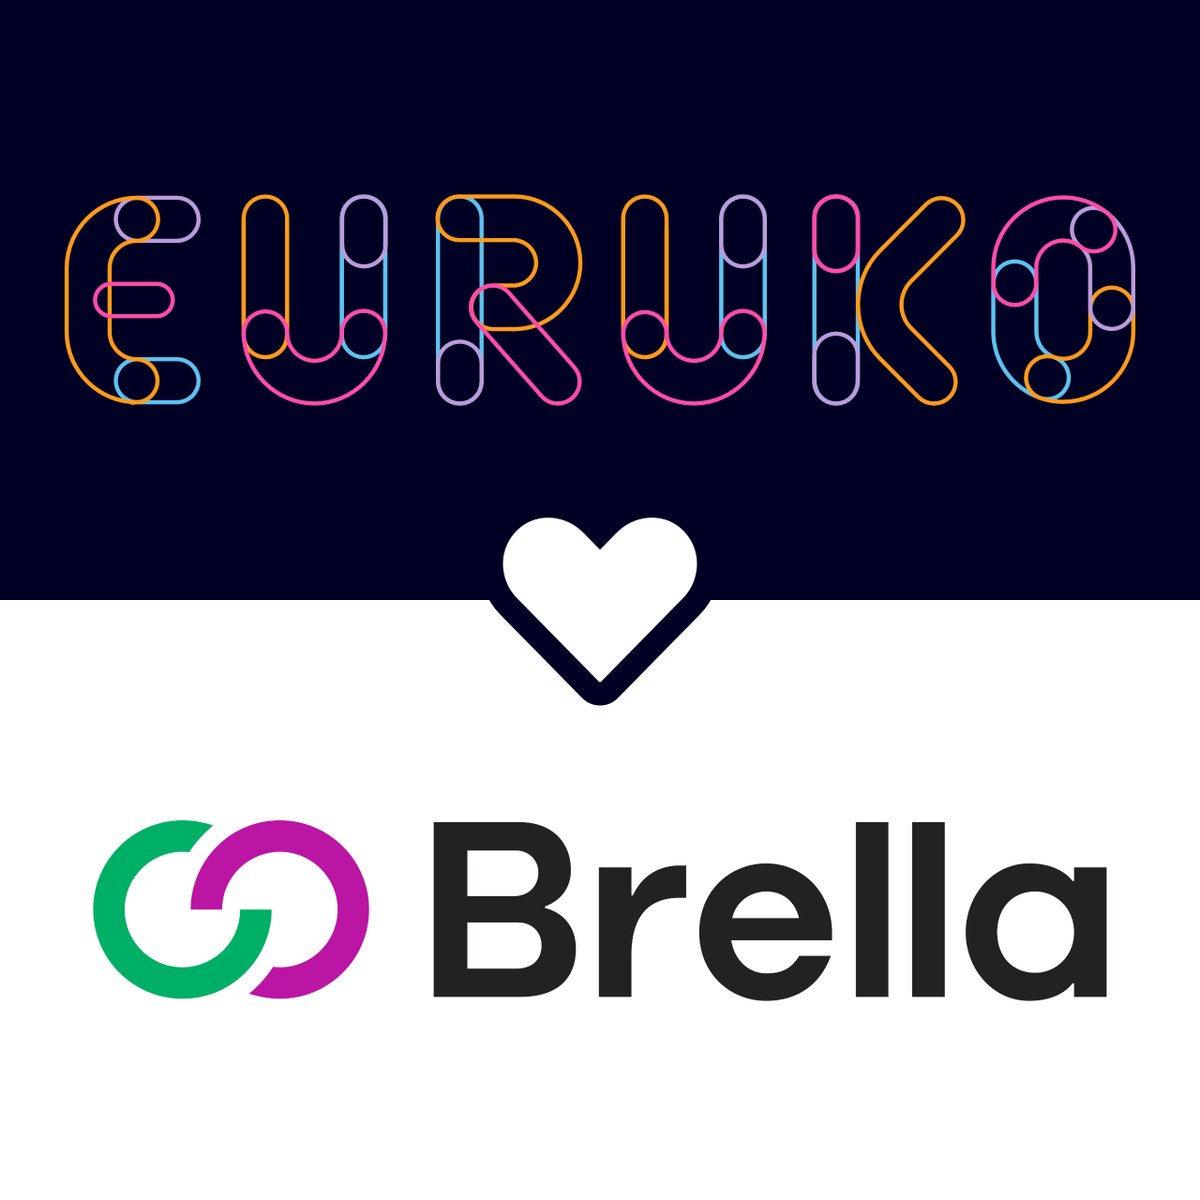 Euruko's online conference platform is provided by @Brellanetwork. Don't be shy sending meeting suggestions to people you'd like to meet at the event!